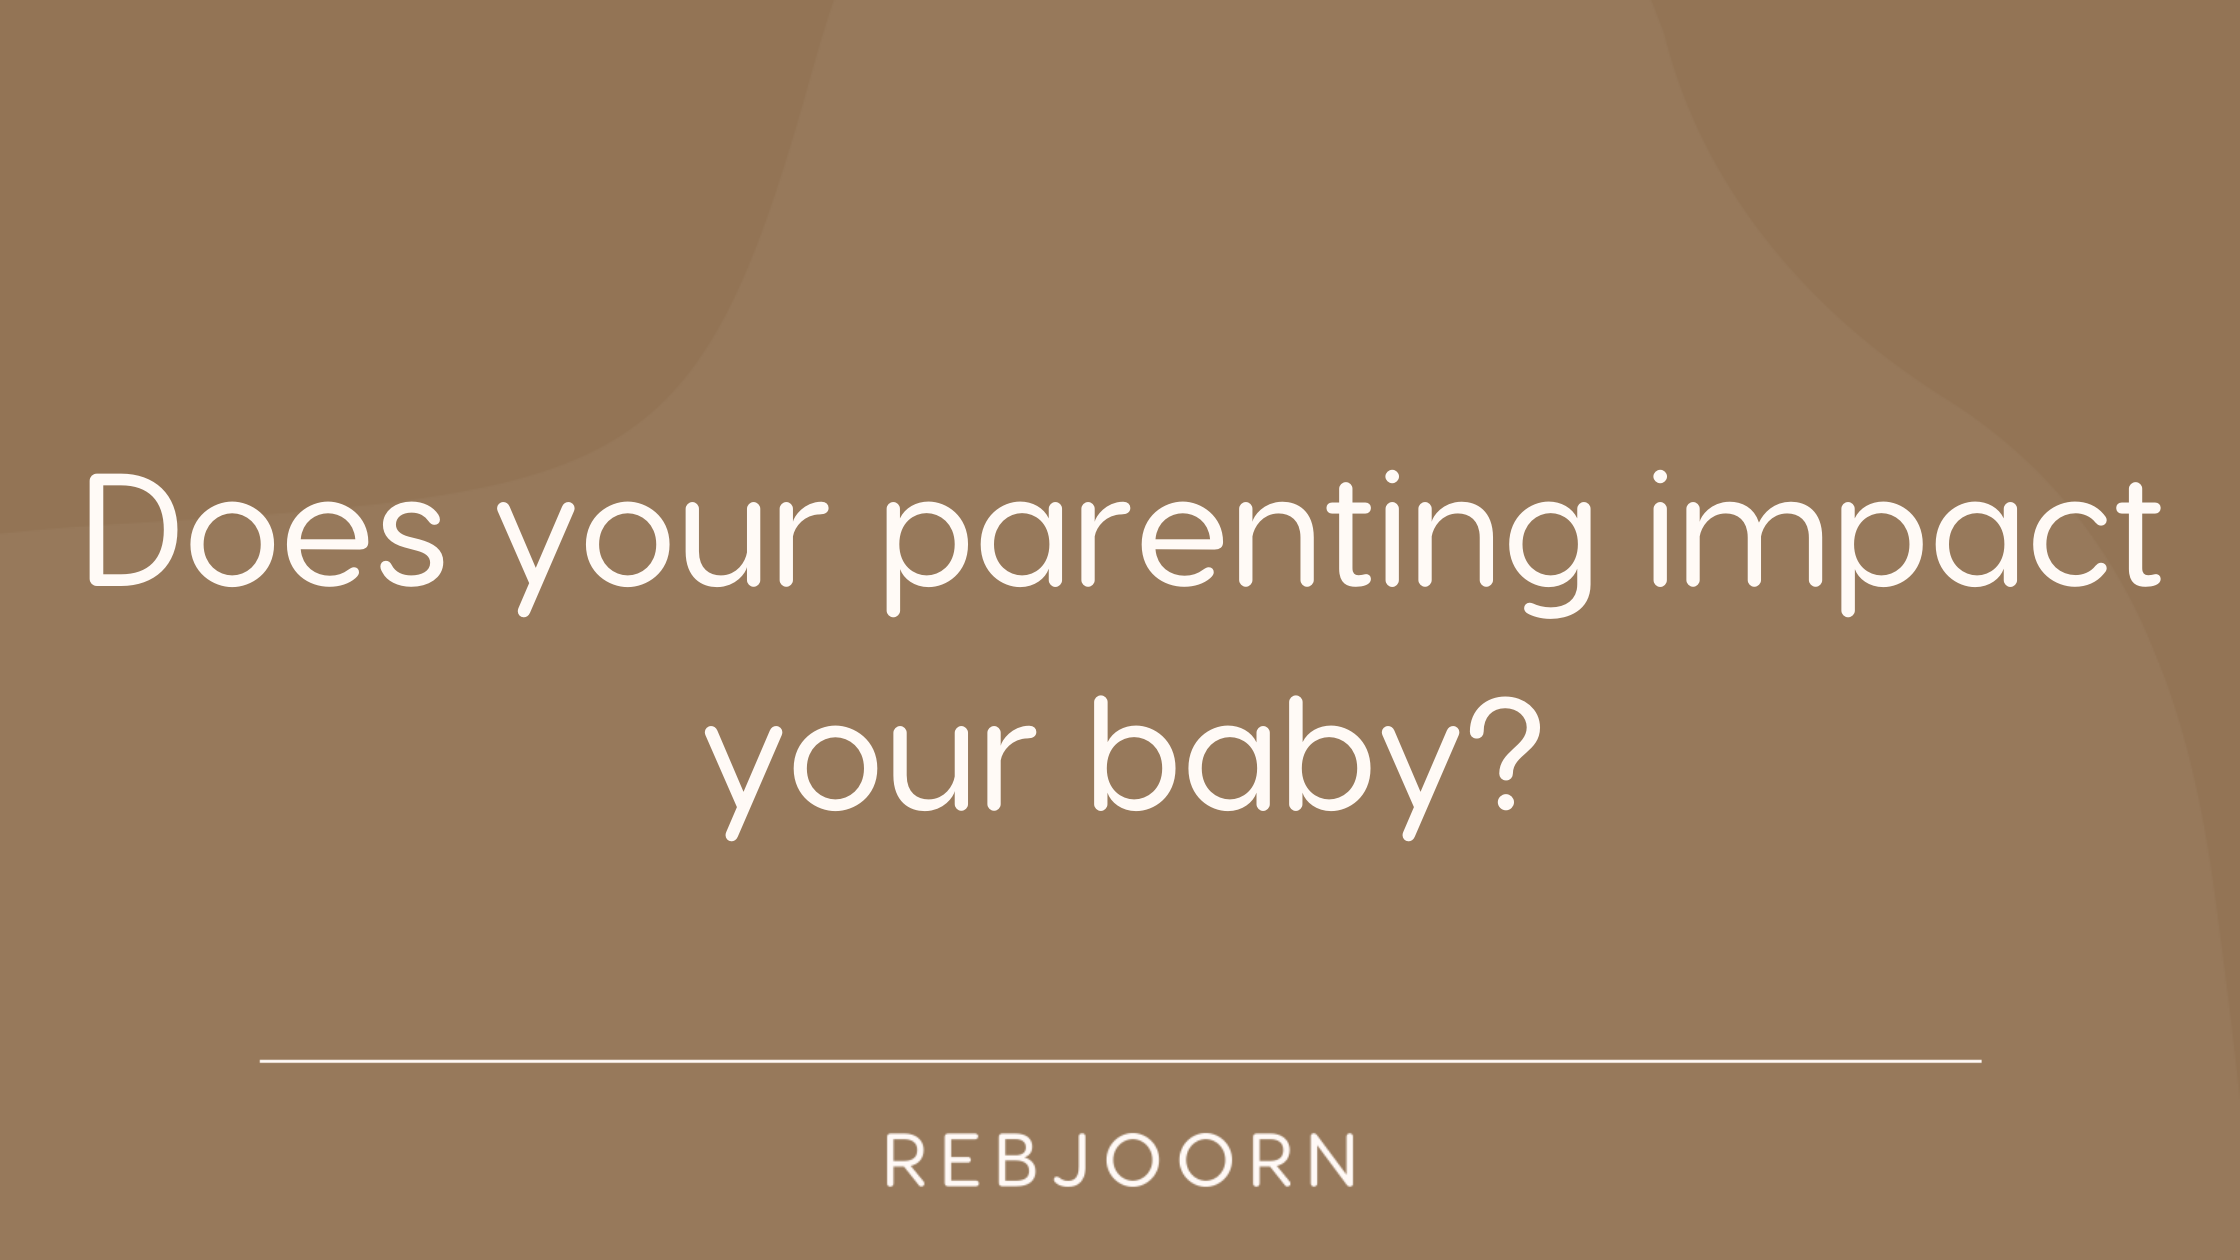 Does your parenting impact your baby?